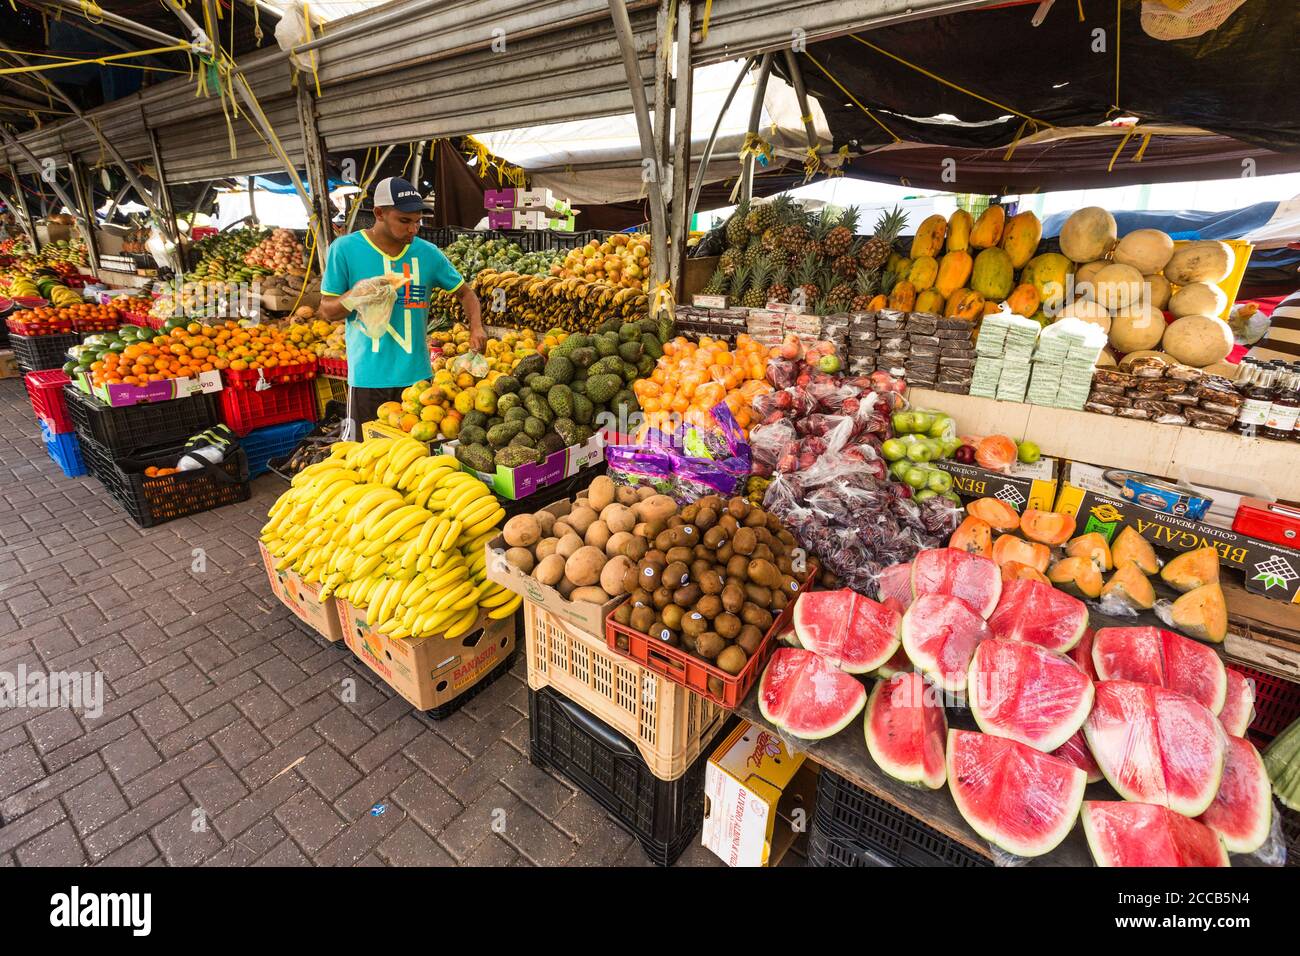 The Floating Market or Drijvende Markt on the Waaigat in the Punda section of Willemstad, the capital of the Caribbean island of Curacao in the Nether Stock Photo